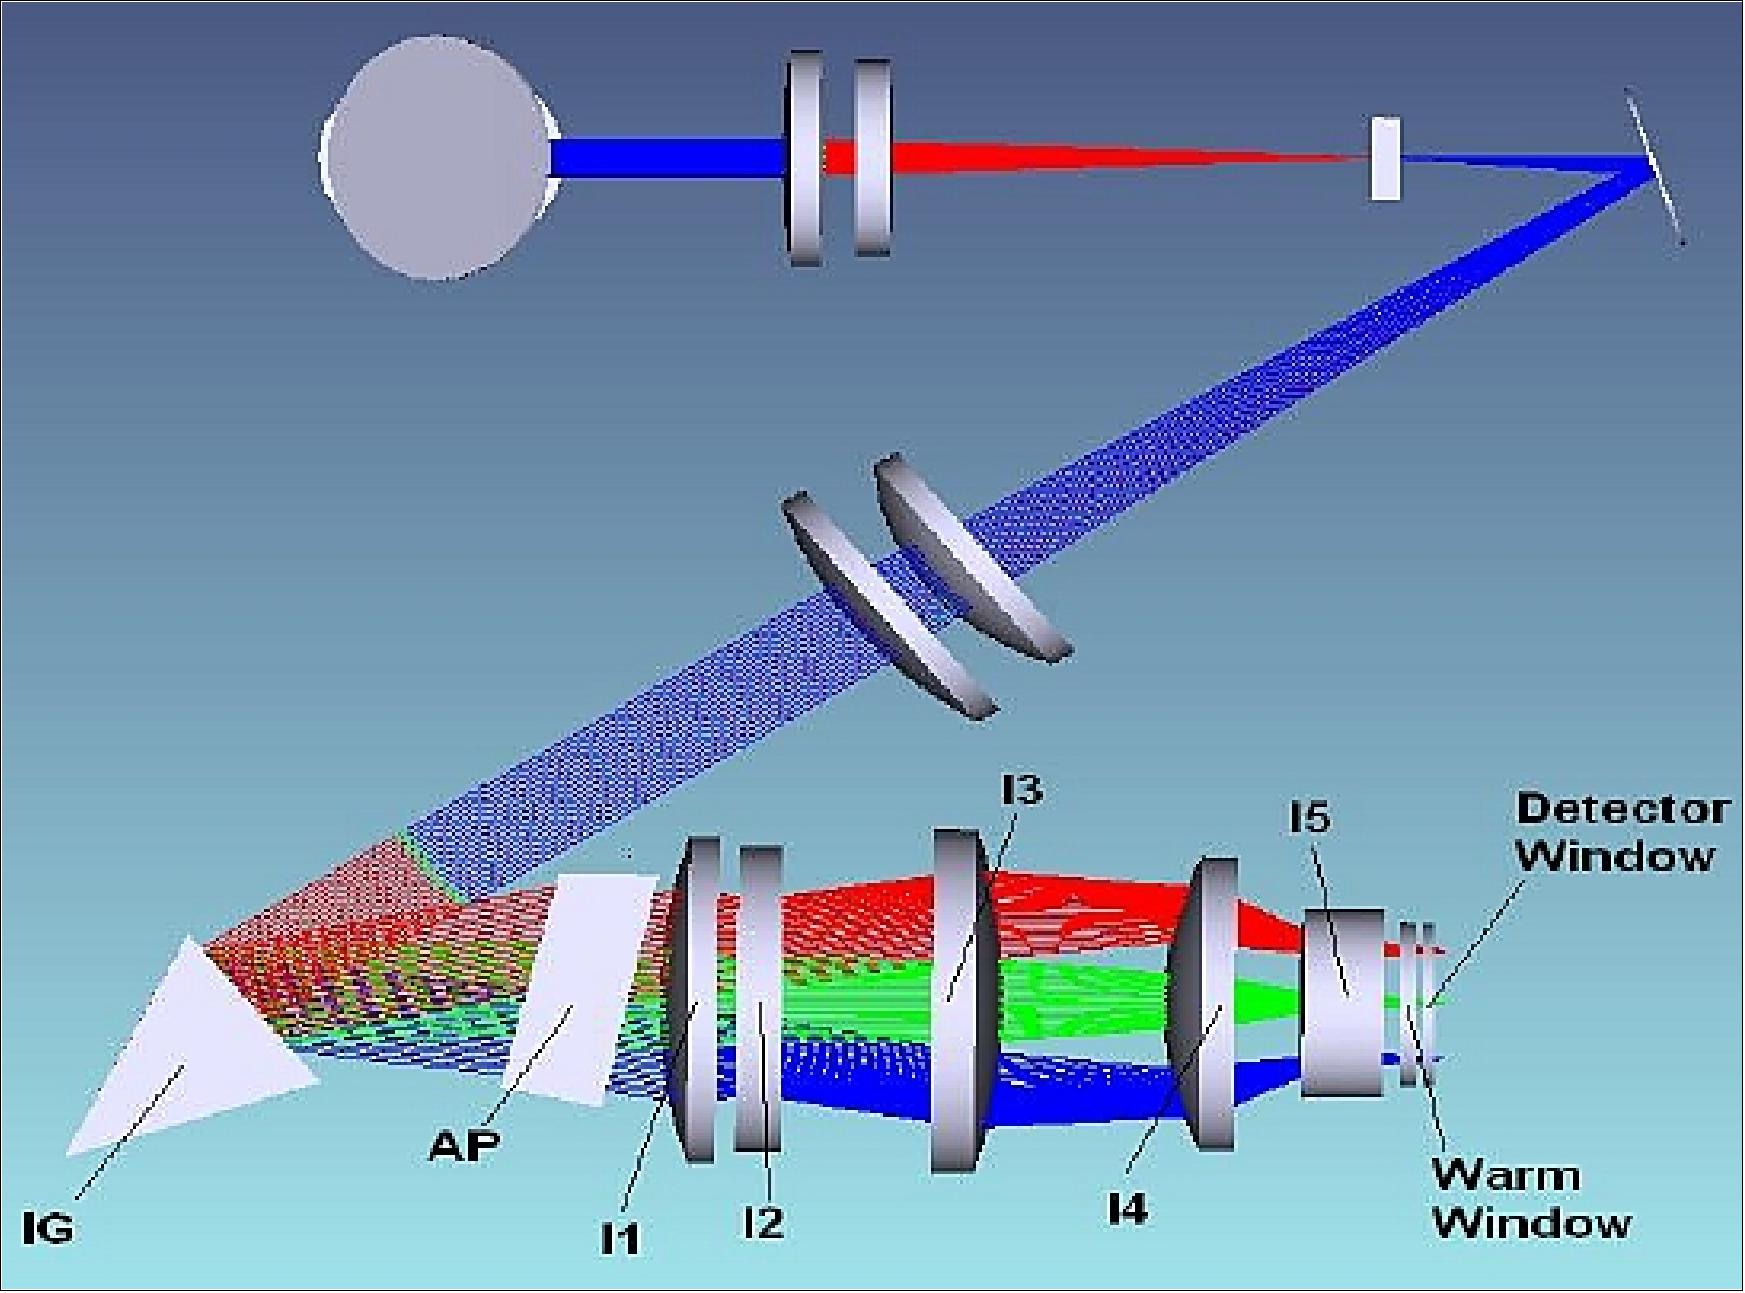 Figure 101: Optical layout of the TROPOMI SWIR spectrometer including the IG (Immersed Grating), an AP (Anamorphic Prism), camera-objective lenses l1-l5, and detector windows (image credit: SRON, TNO, Ref. 86)